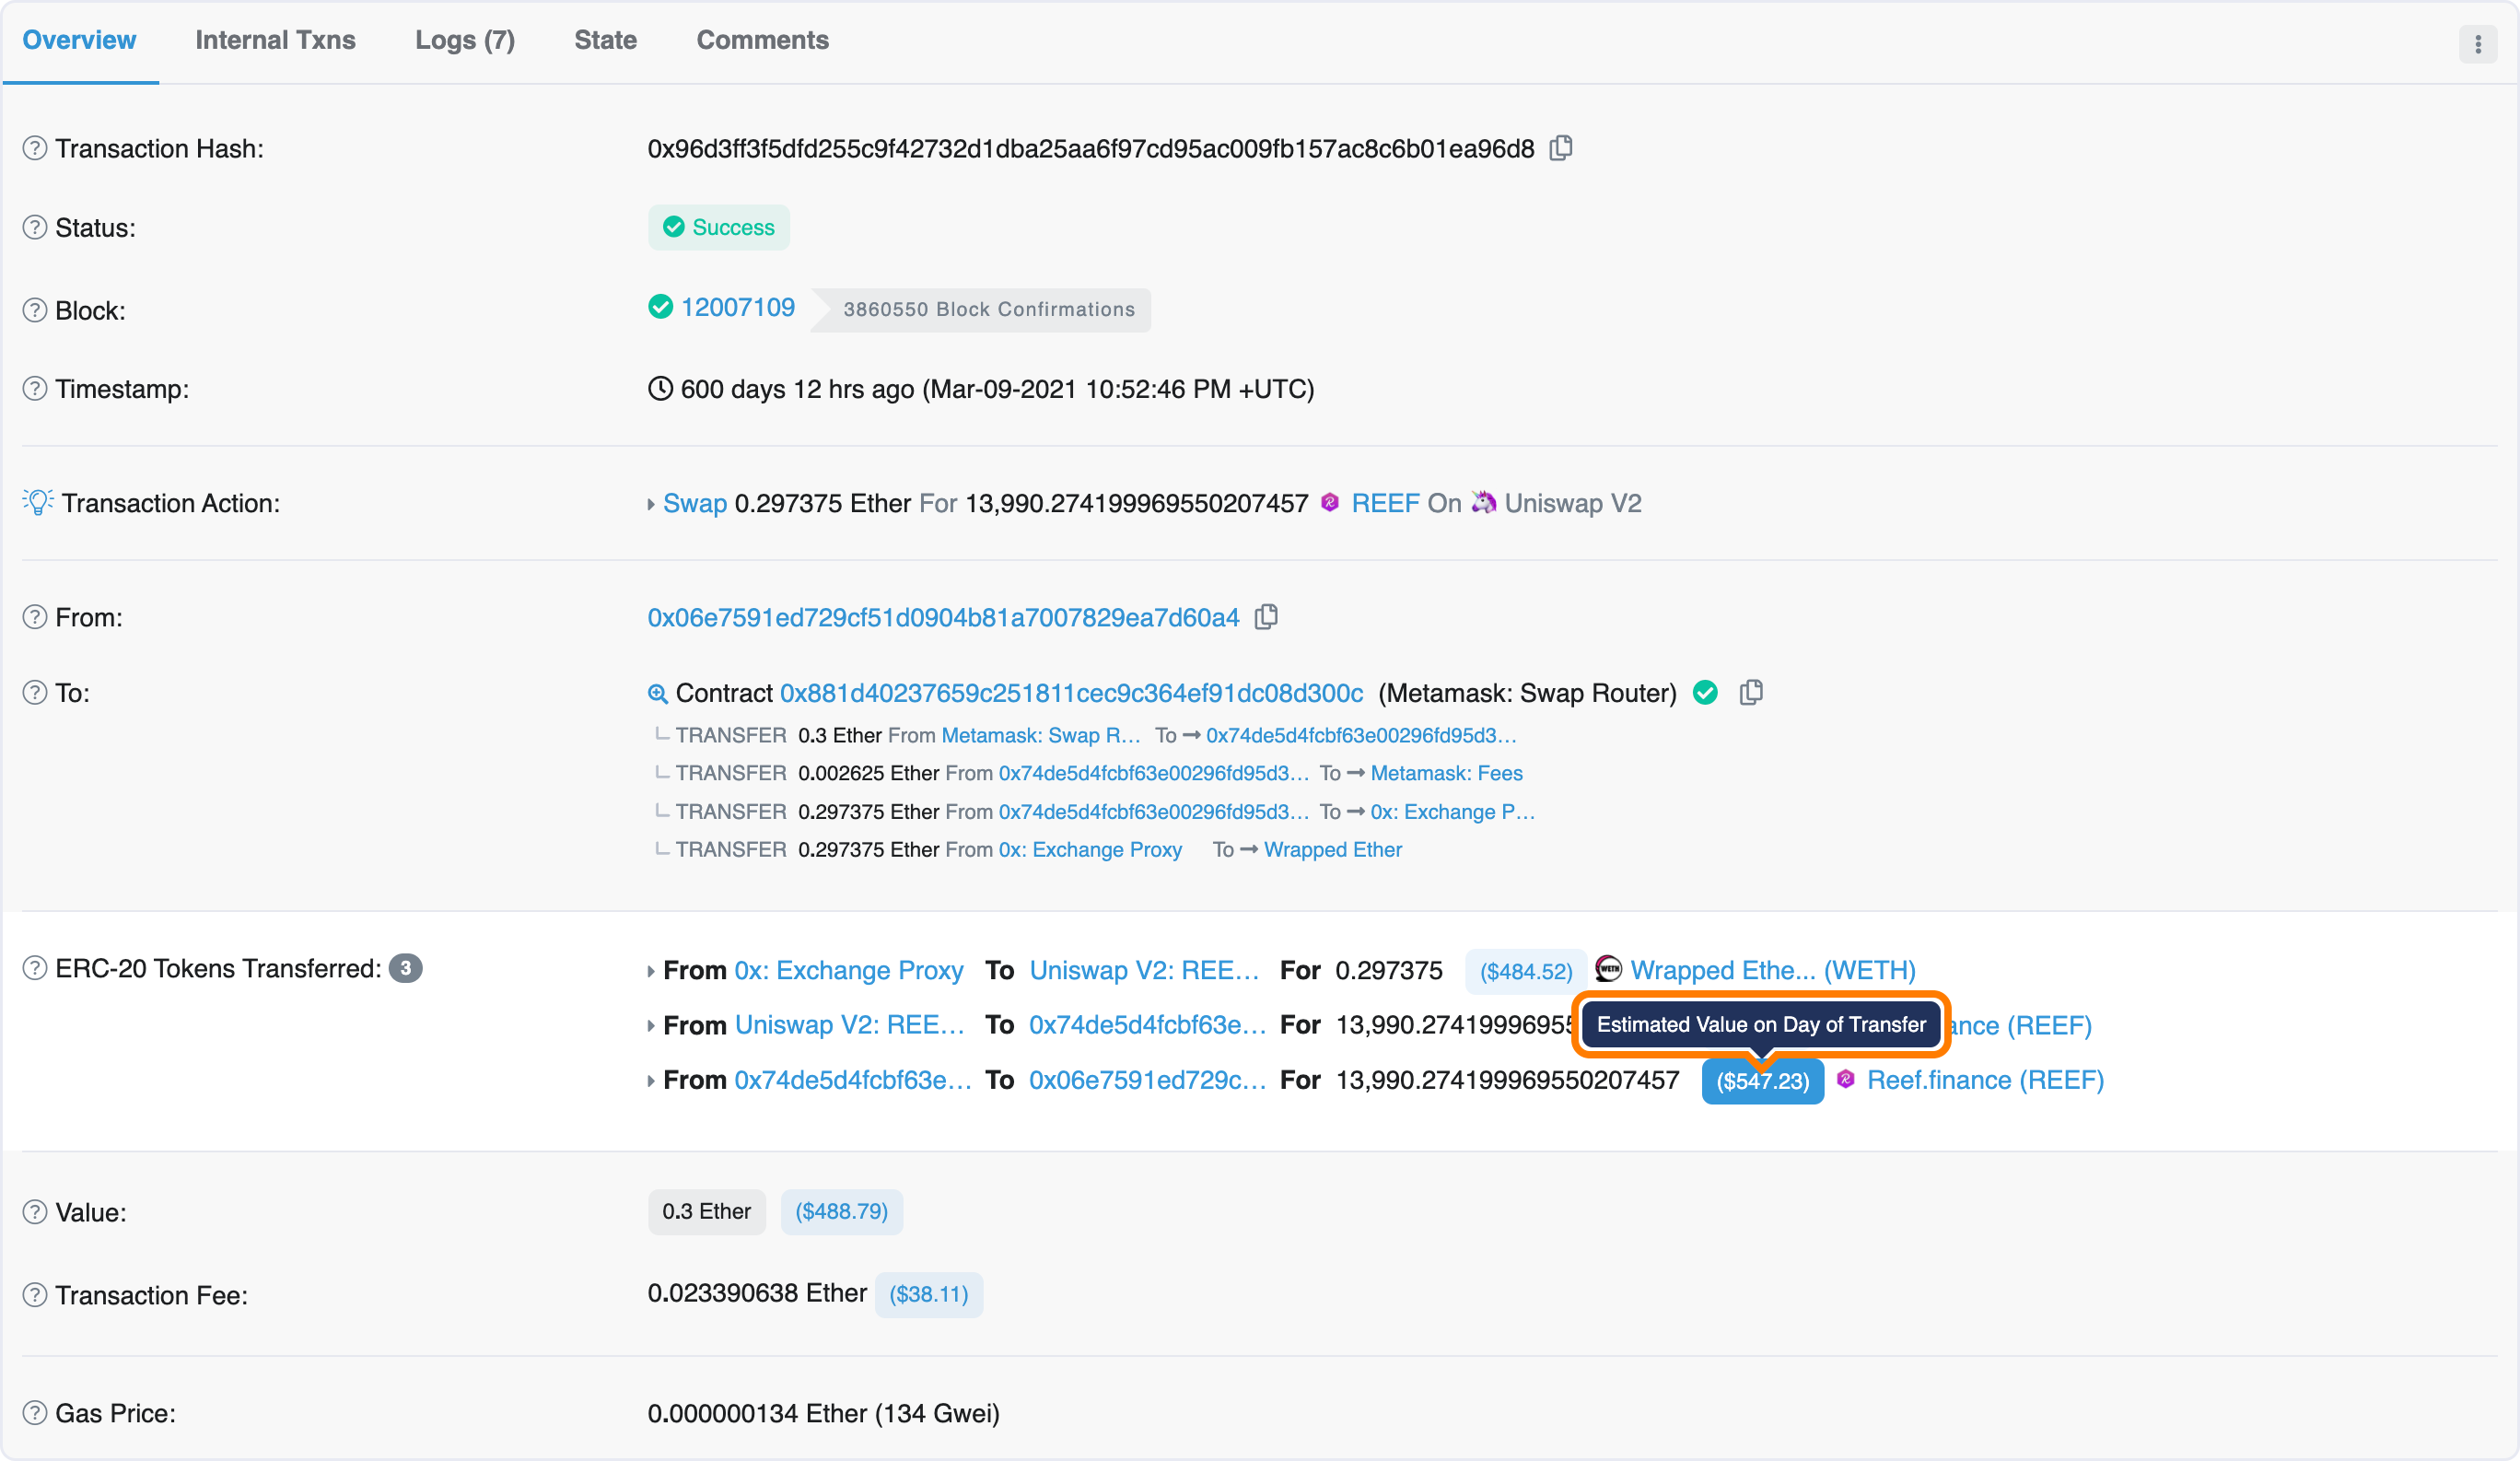 Etherscan price at time of swap